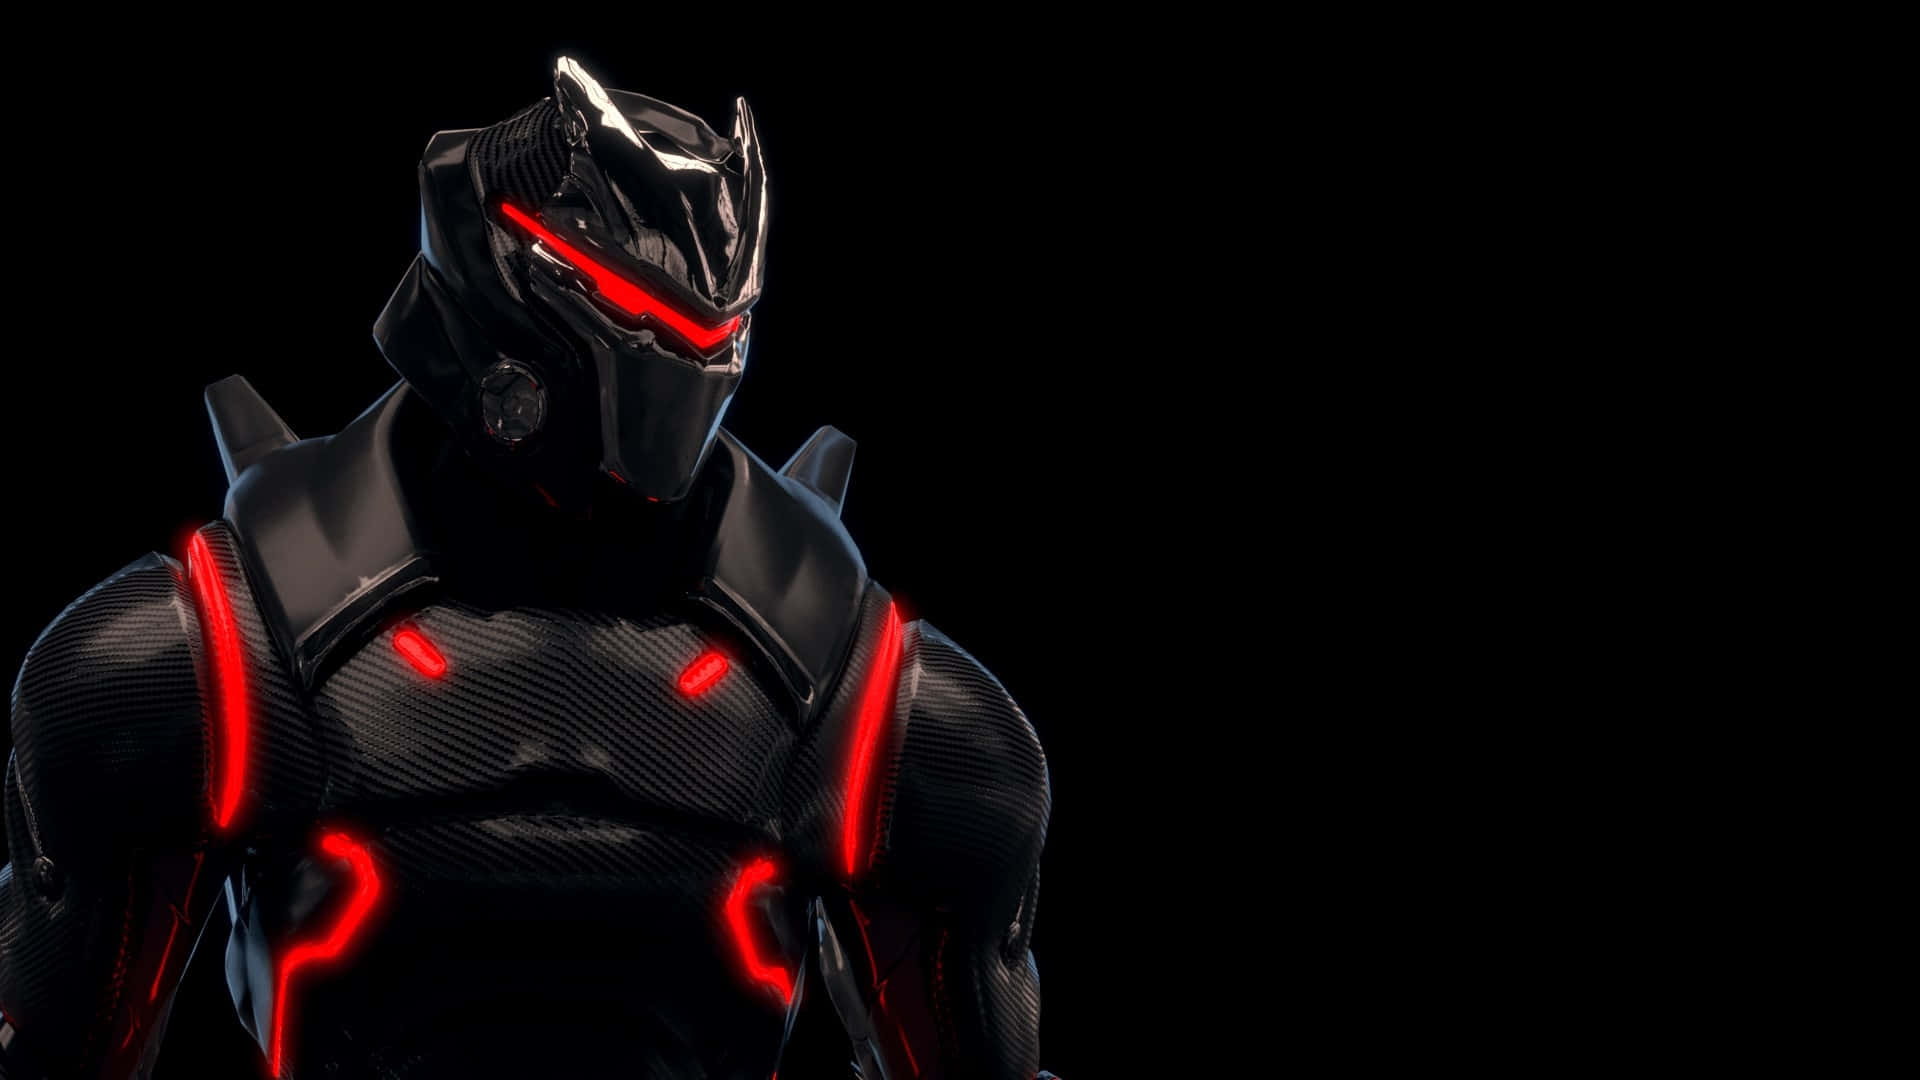 A Black Panther In A Red Suit With Glowing Eyes Wallpaper